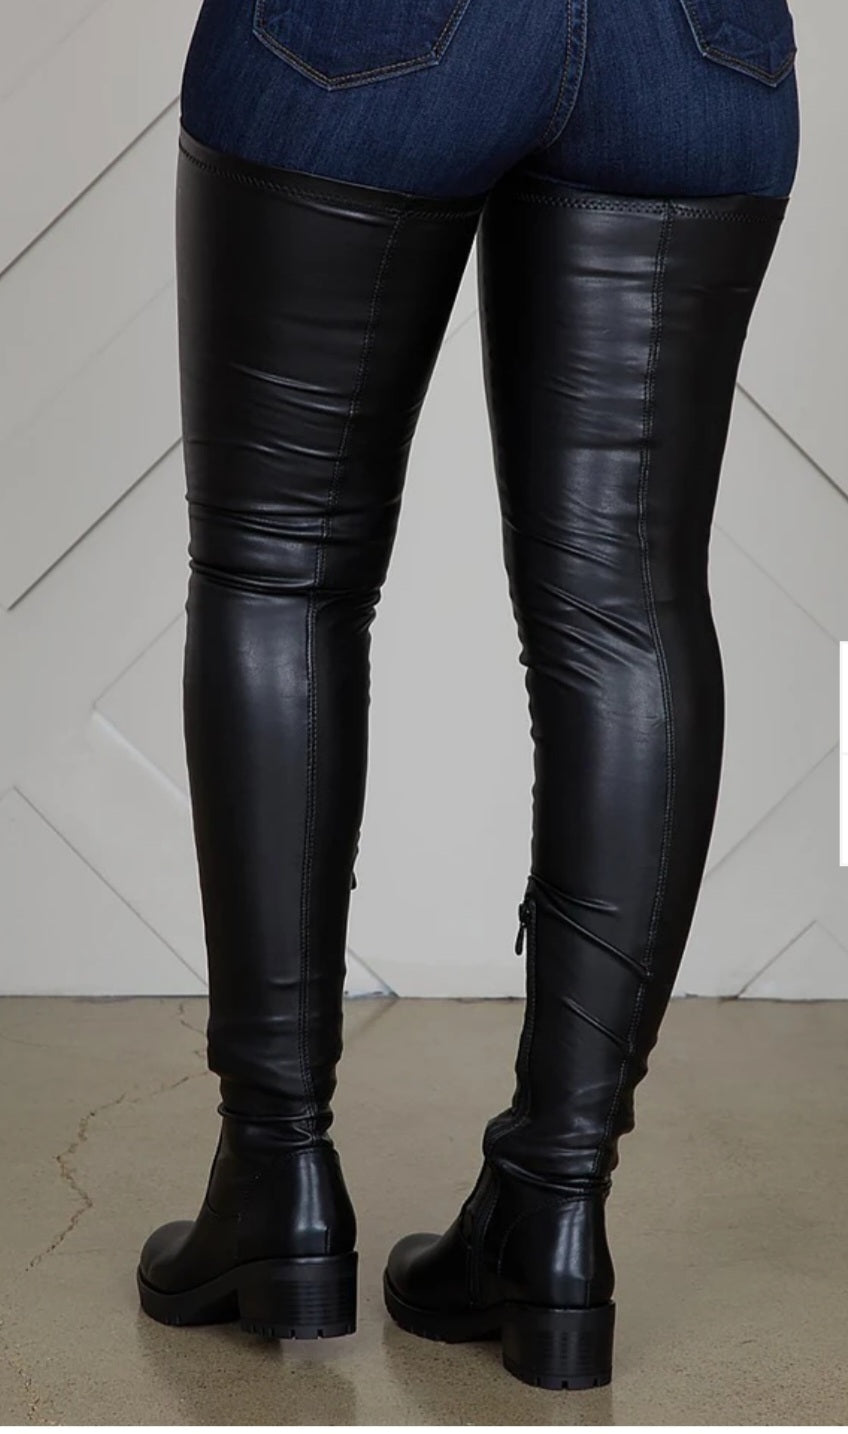 Surgical Thigh High Boots ( Pre-Order)